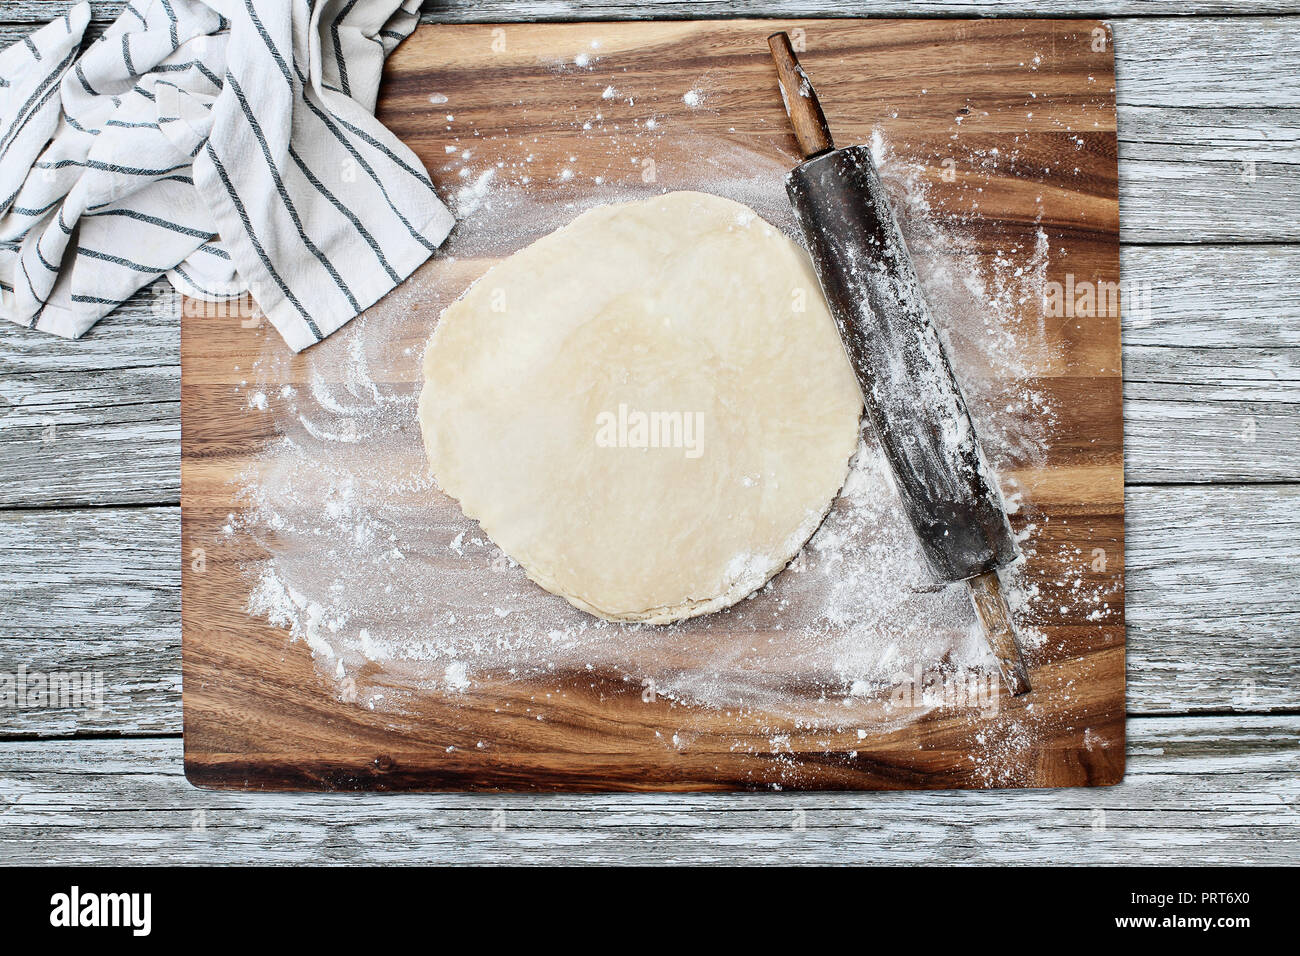 Homemade butter pie crust dough with rolling pin and towel over floured rustic wooden background. Image shot from overhead. Stock Photo